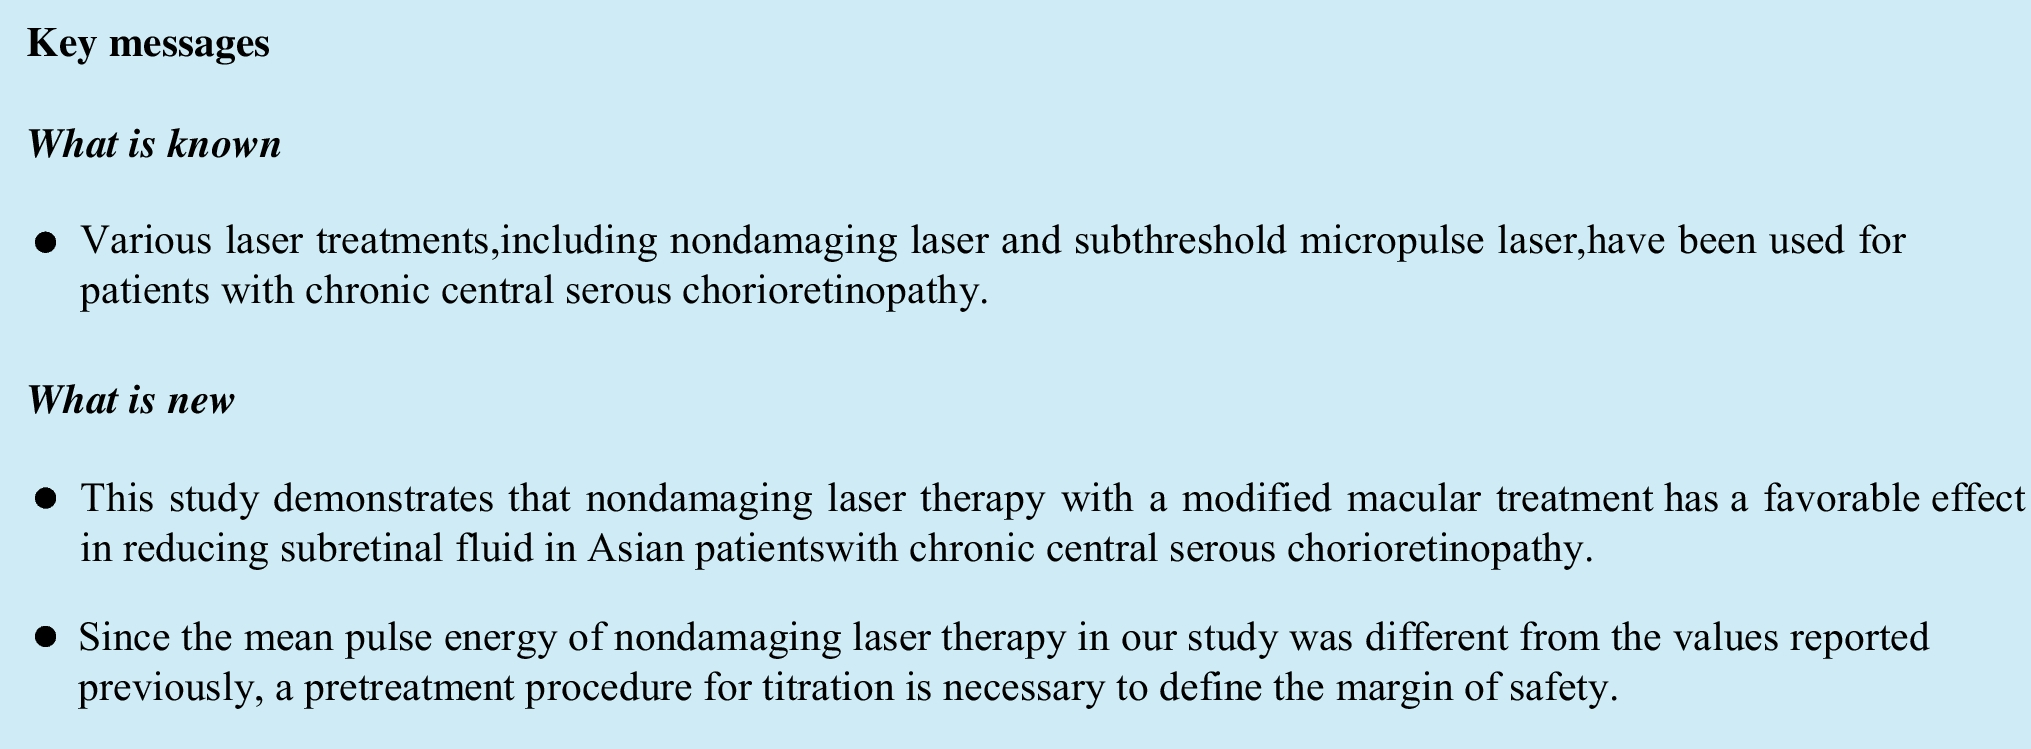 The effect of nondamaging subthreshold laser therapy in patients with chronic central serous chorioretinopathy